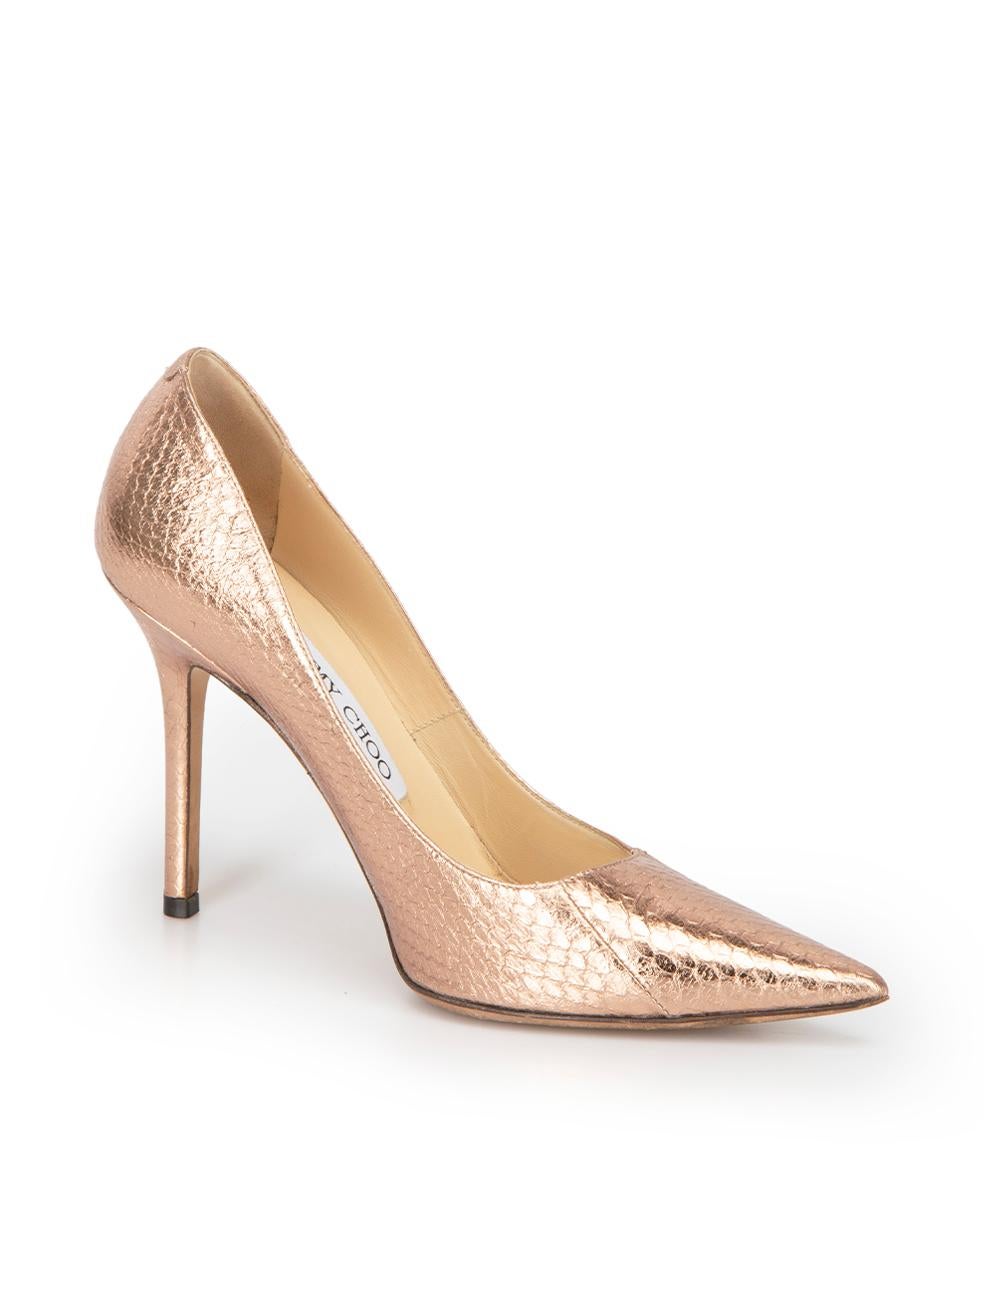 CONDITION is Very good. Minimal wear to heels is evident. Minimal wear to the insole and outsole on this used Jimmy Choo designer resale item. This item includes the original shoebox.



Details


Metallic bronze

Leather

Slip on pumps

Embossed